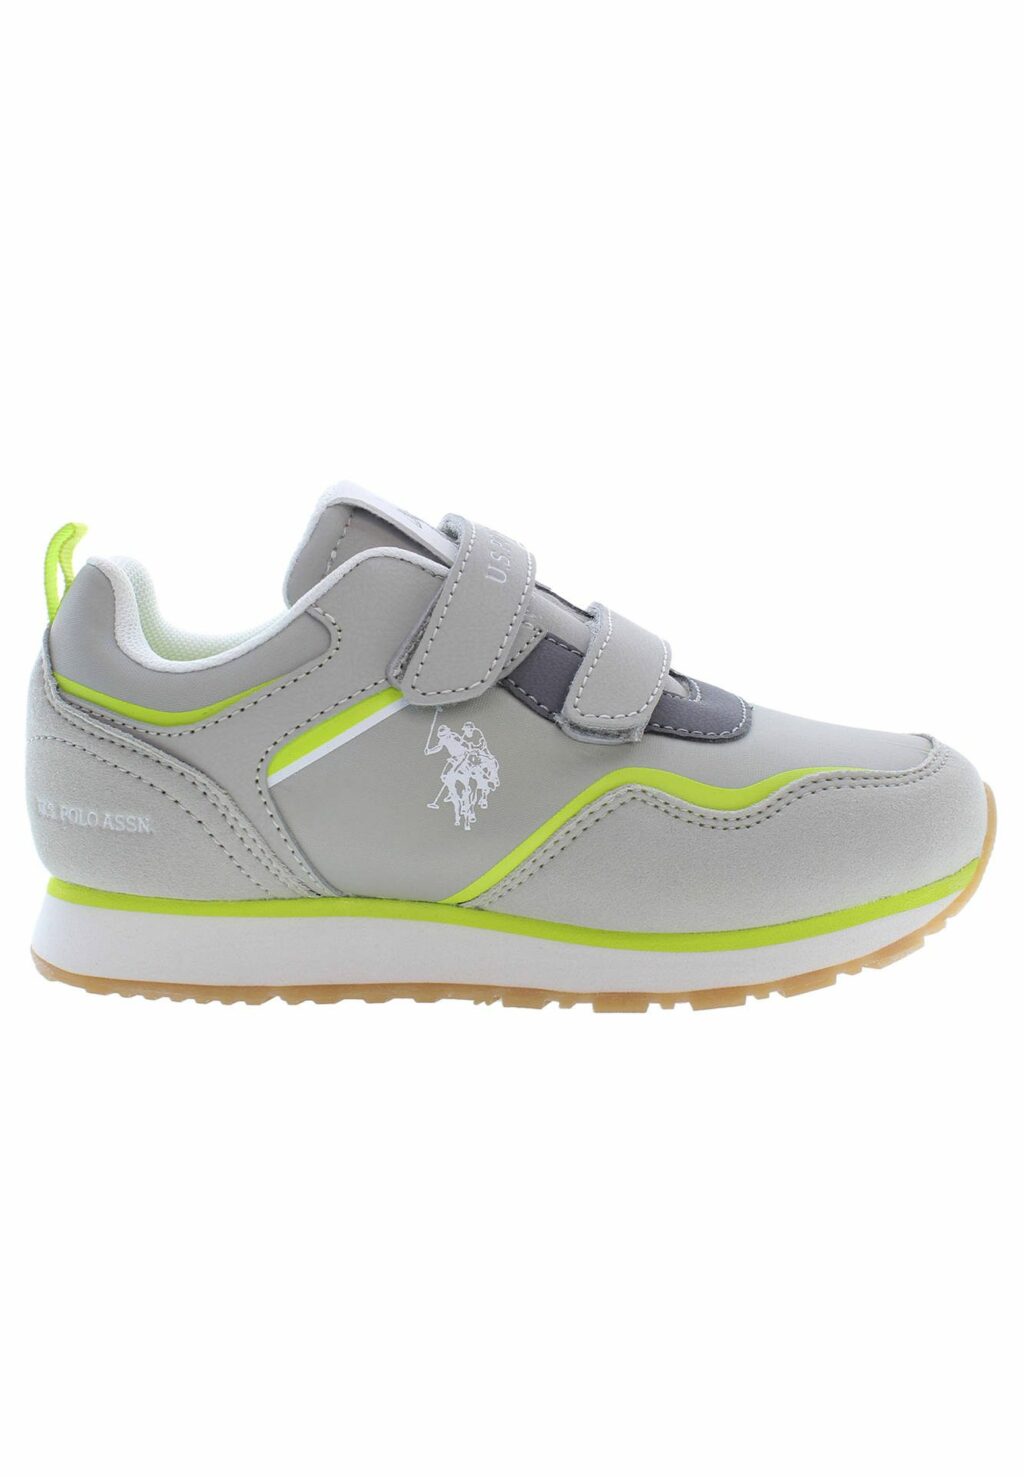 US POLO BEST PRICE SPORTS SHOES FOR KIDS NOBIK009K3NH1_GRIGIO_LGR-LGE02